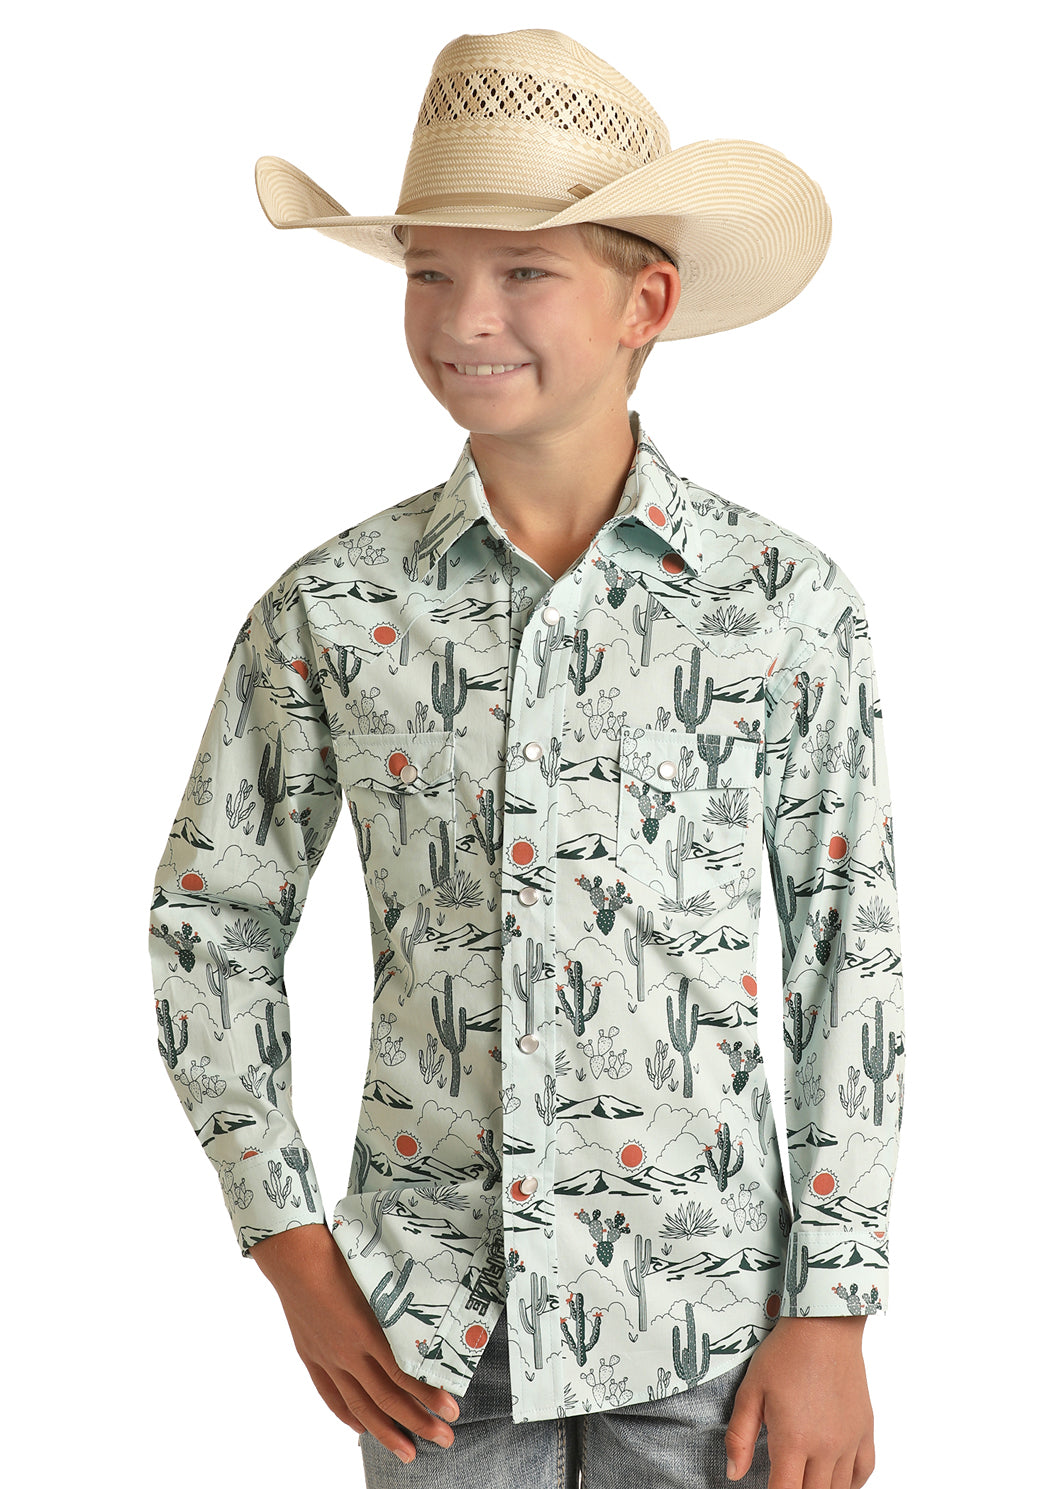 Rock & Roll Cowboy Dale Brisby Cactus Button up Shirt - Teal